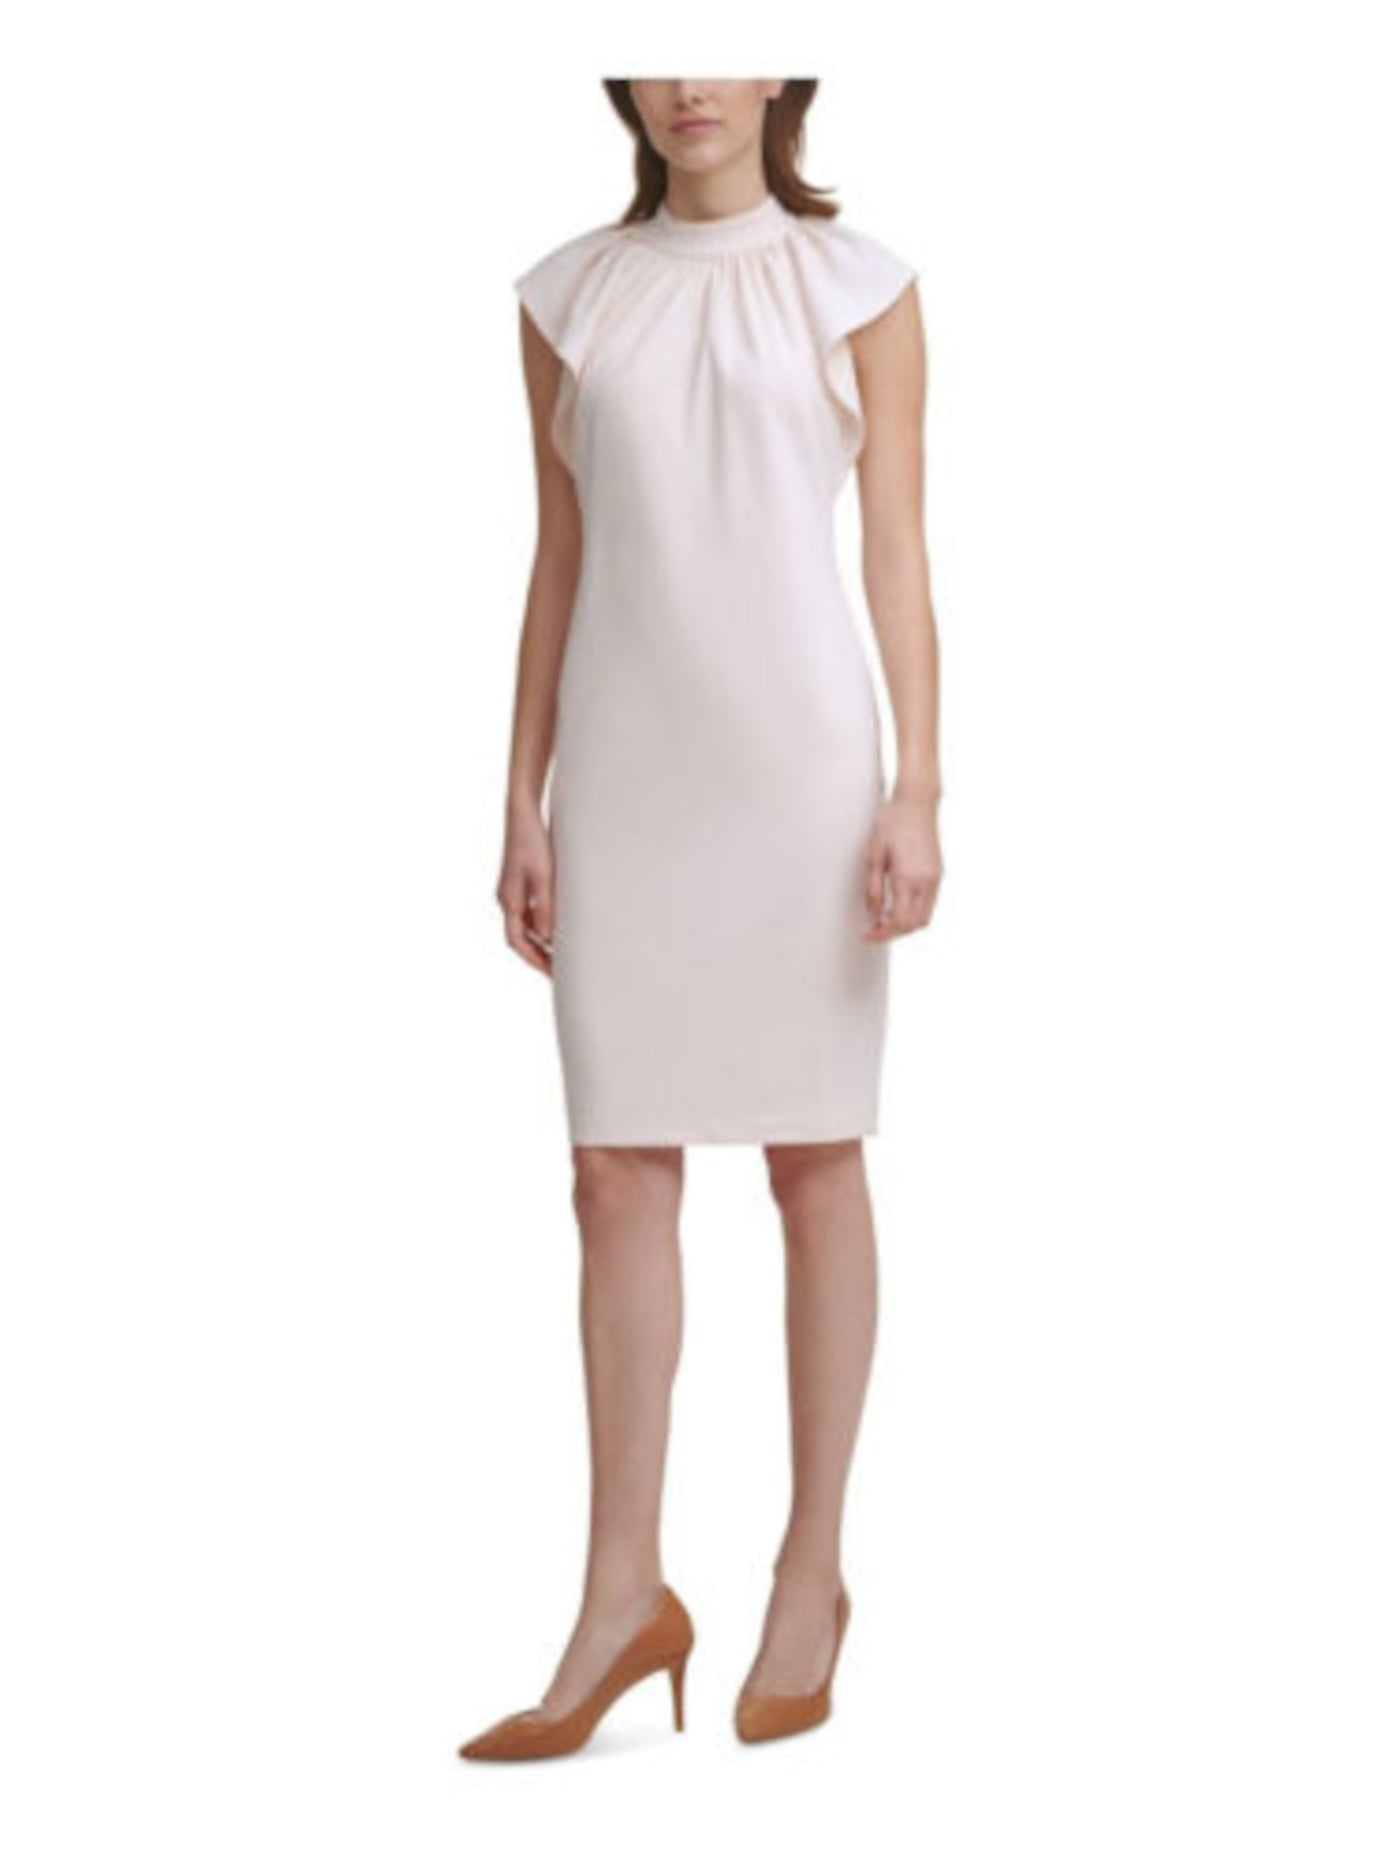 CALVIN KLEIN Womens Ivory Stretch Ruched Zippered Ruffle Cap Sleeves Mock Neck Above The Knee Wear To Work Sheath Dress 10